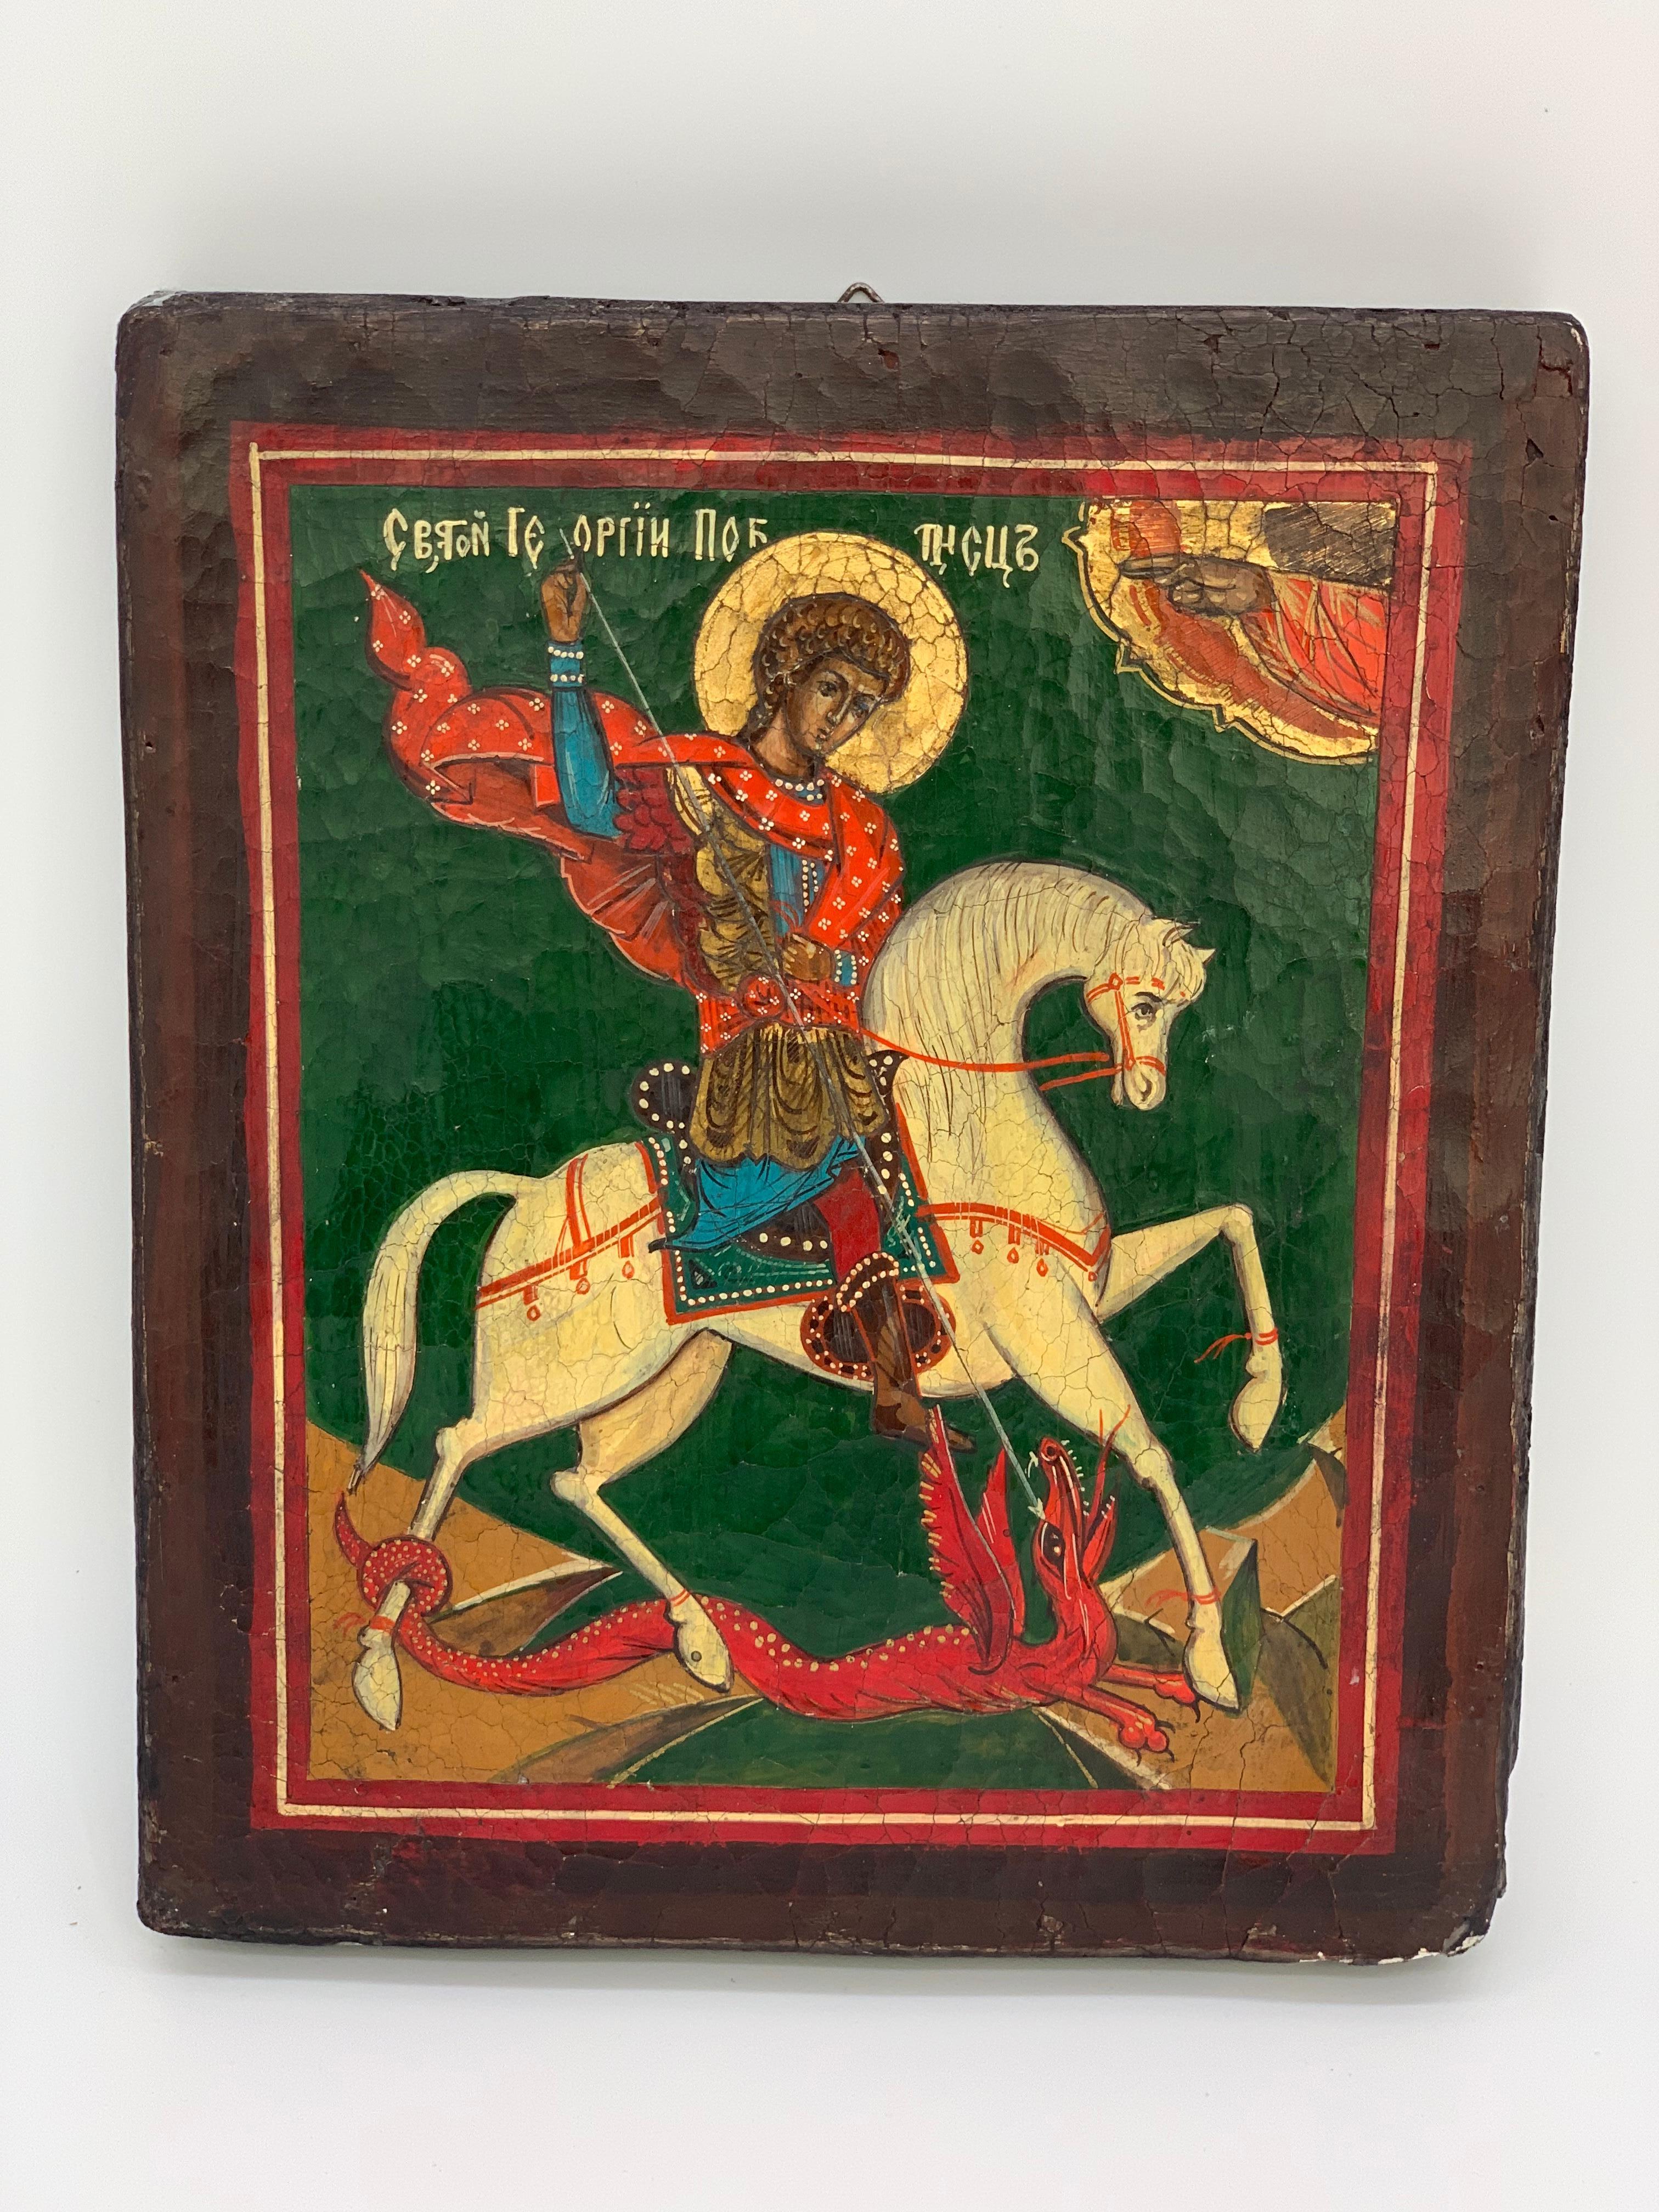 Beautifully painted Icon of Saint George slaying a dragon on white horse. Painted in beautiful detail.
19th century Russian Icon with green, red, white and blue.

         